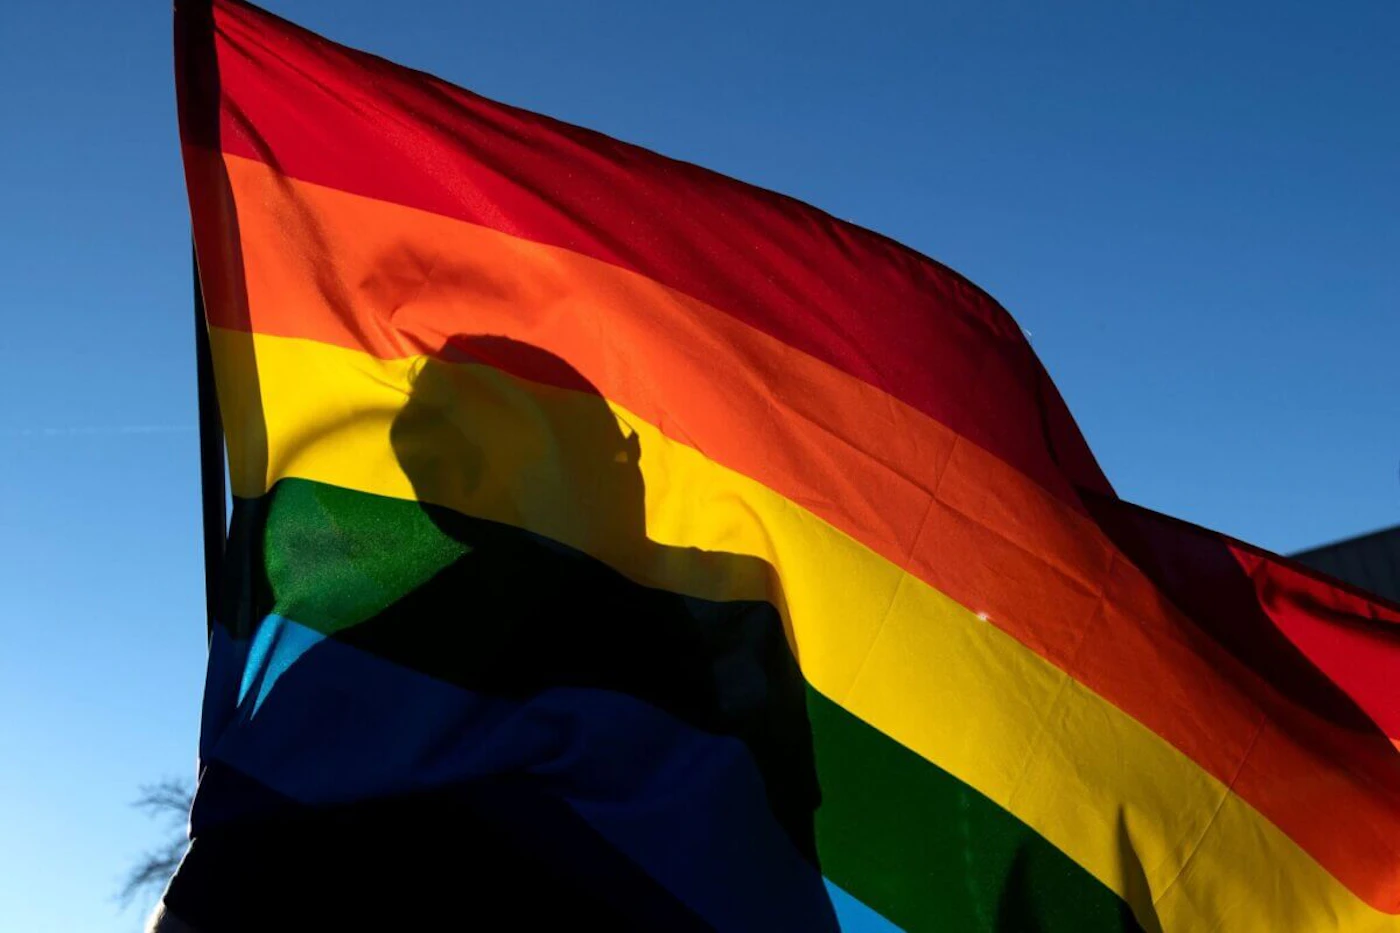 TOPSHOT - A commuity members silhouette is seen through a Pride flag while paying their respects to the victims of the mass shooting at Club Q, an LGBTQ nightclub, in Colorado Springs, Colorado, on November 20, 2022. - At least five people were killed and 18 wounded in a mass shooting at an LGBTQ nightclub in the US city of Colorado Springs, police said on November 20, 2022. (Photo by Jason Connolly / AFP) (Photo by JASON CONNOLLY/AFP via Getty Images)